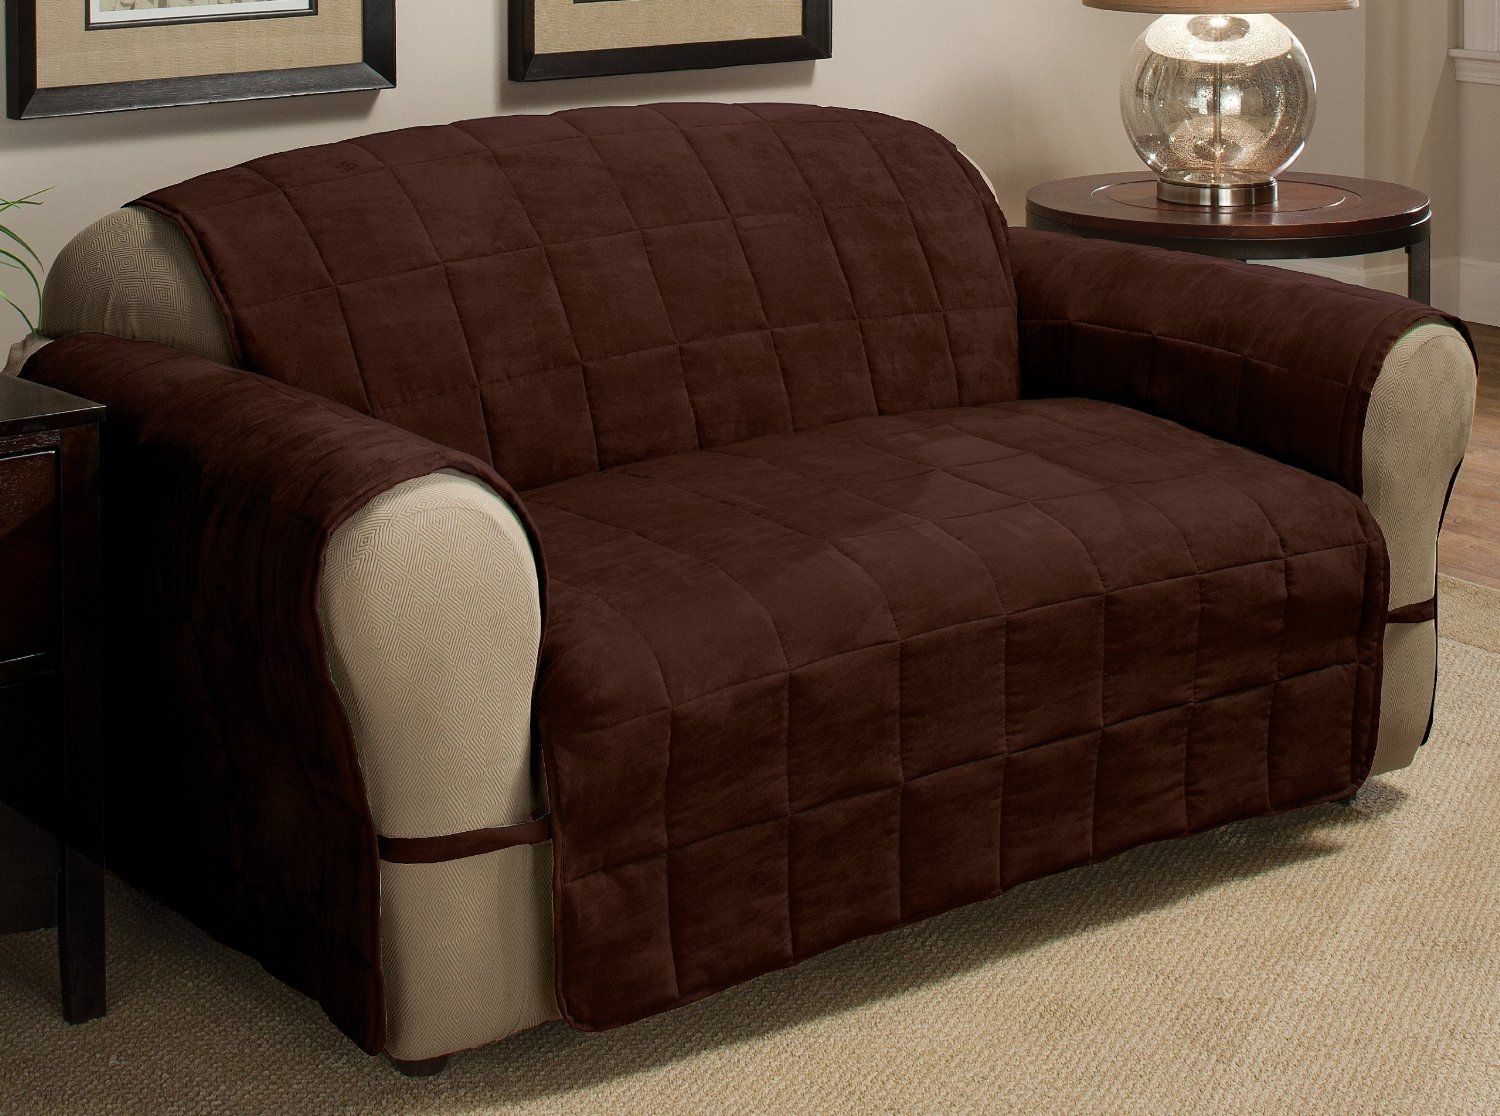 Sofas Center Microfiber Pet Furnitureers With Tuck In Flapser Pertaining To Dog Sofas And Chairs (Photo 6 of 15)